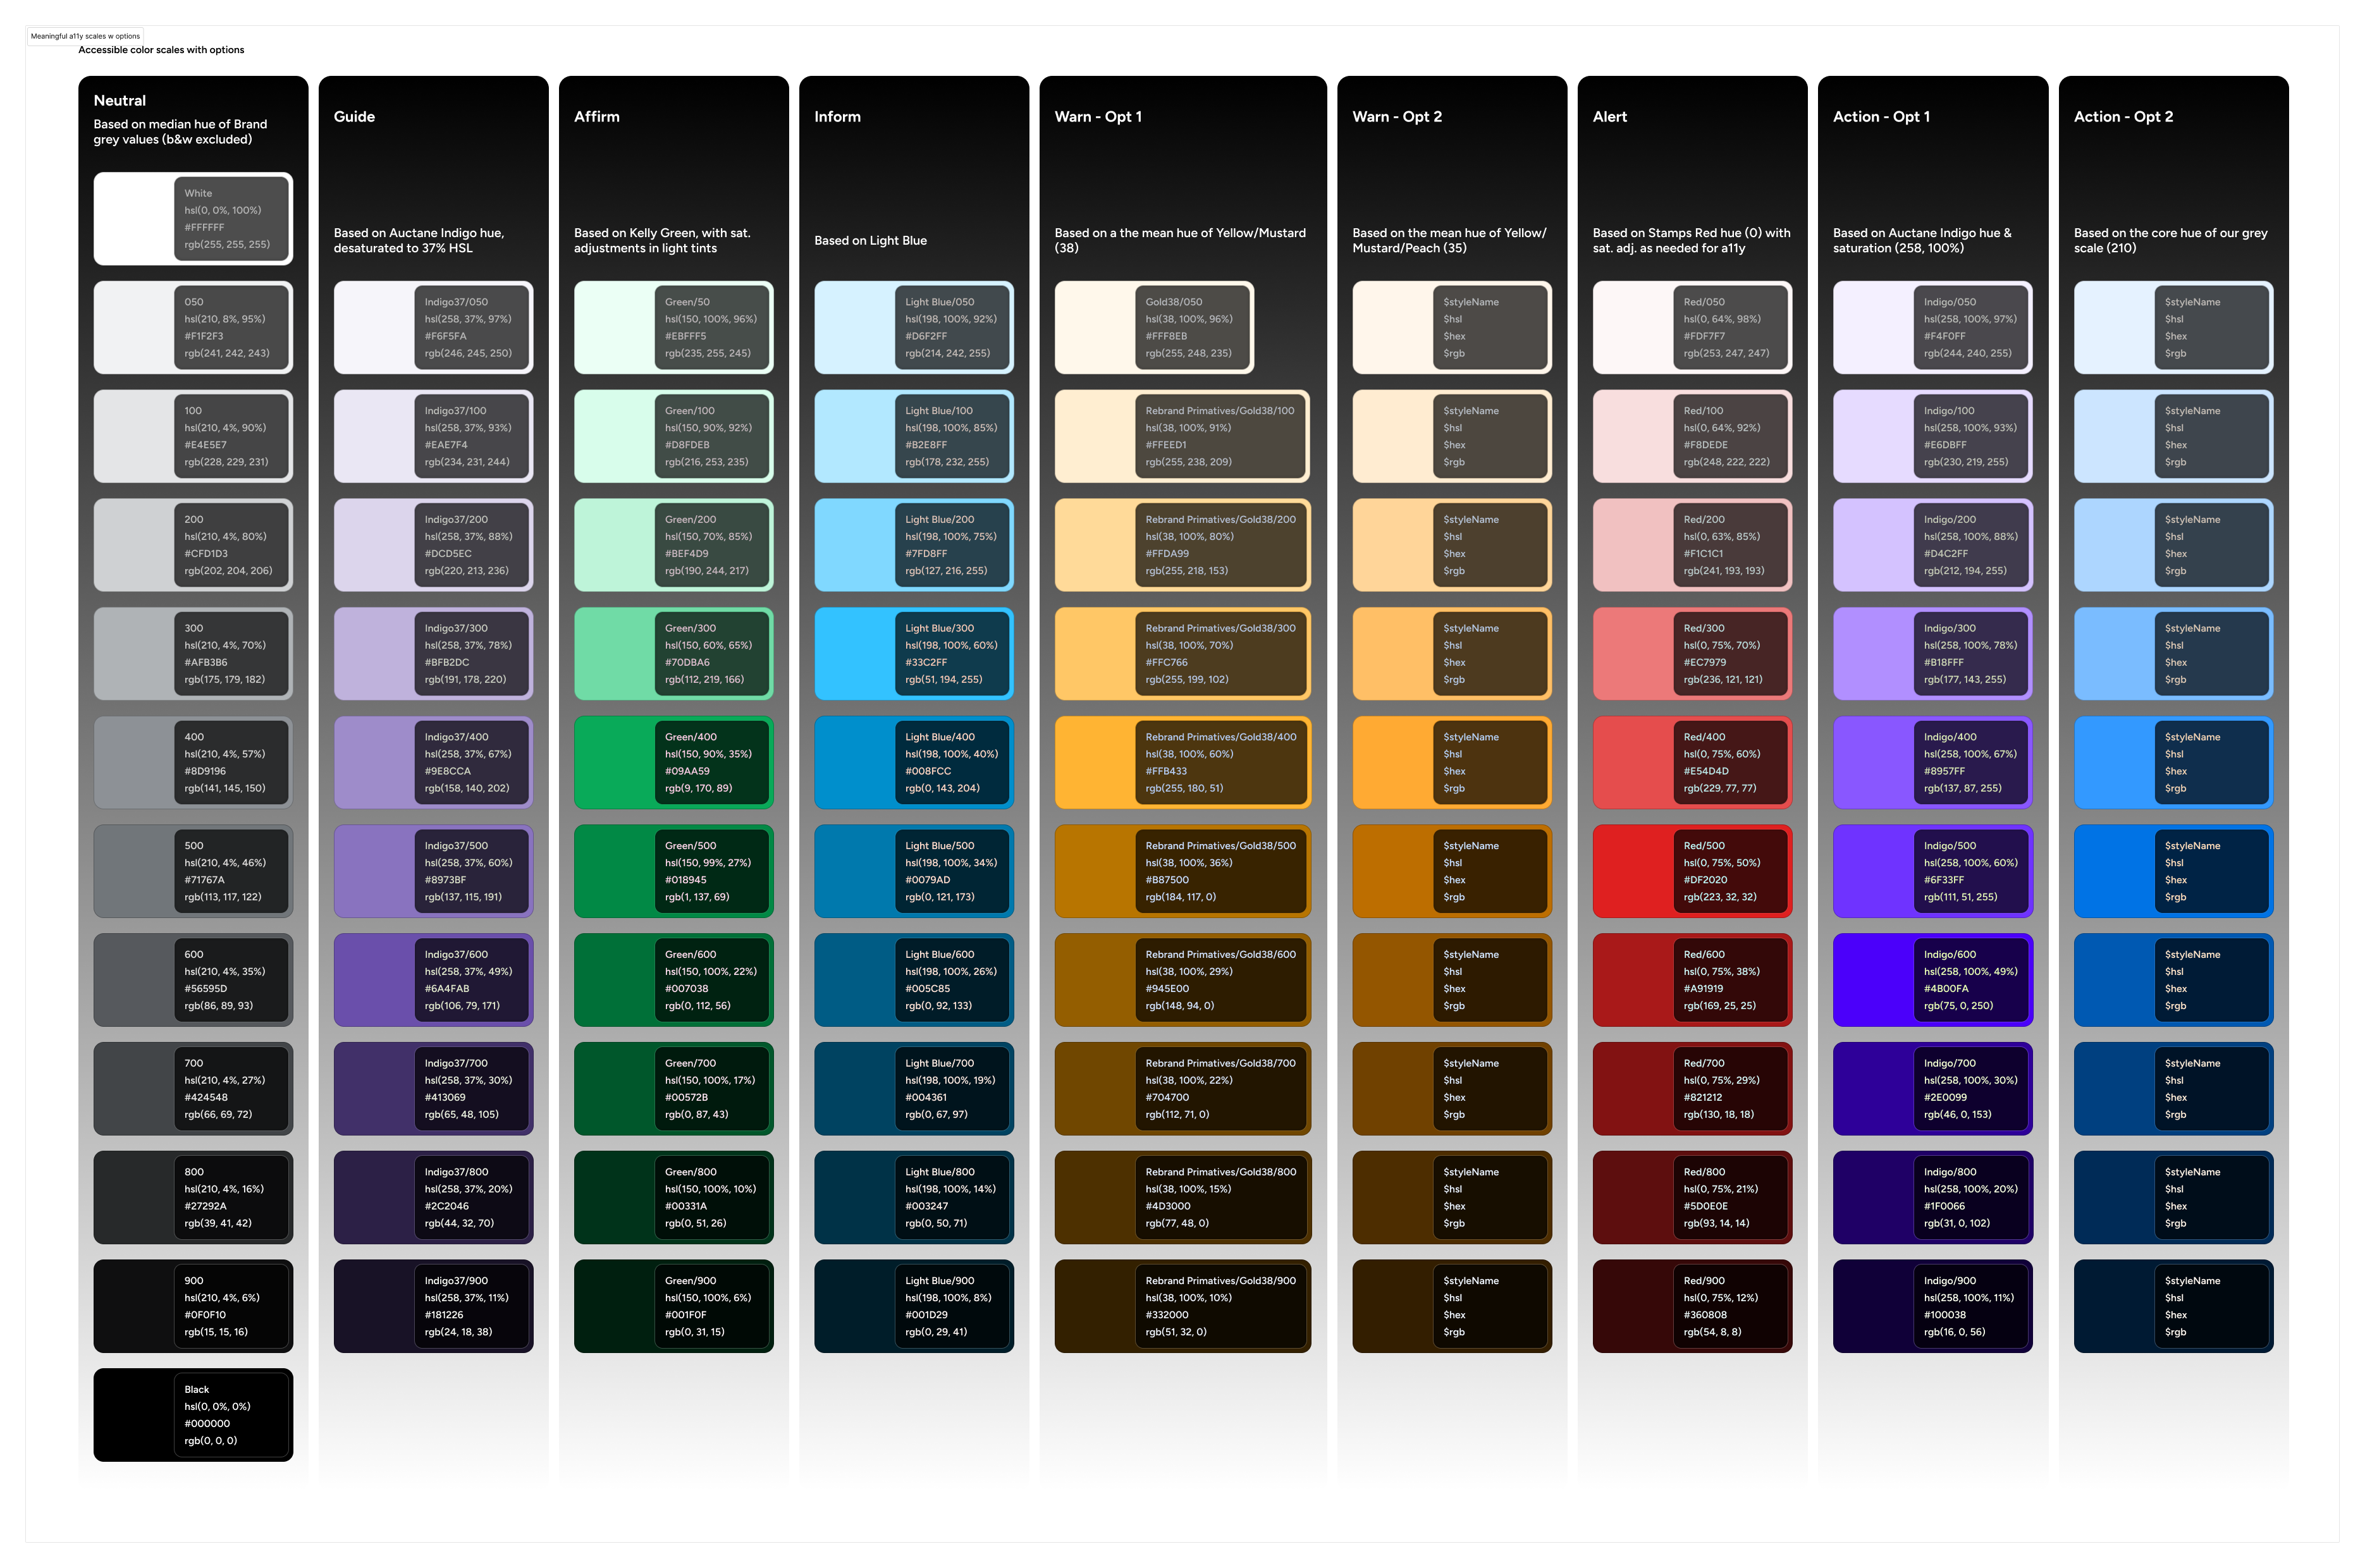 White to black grey scale steps, with some color scale options tied to semantic meanings.